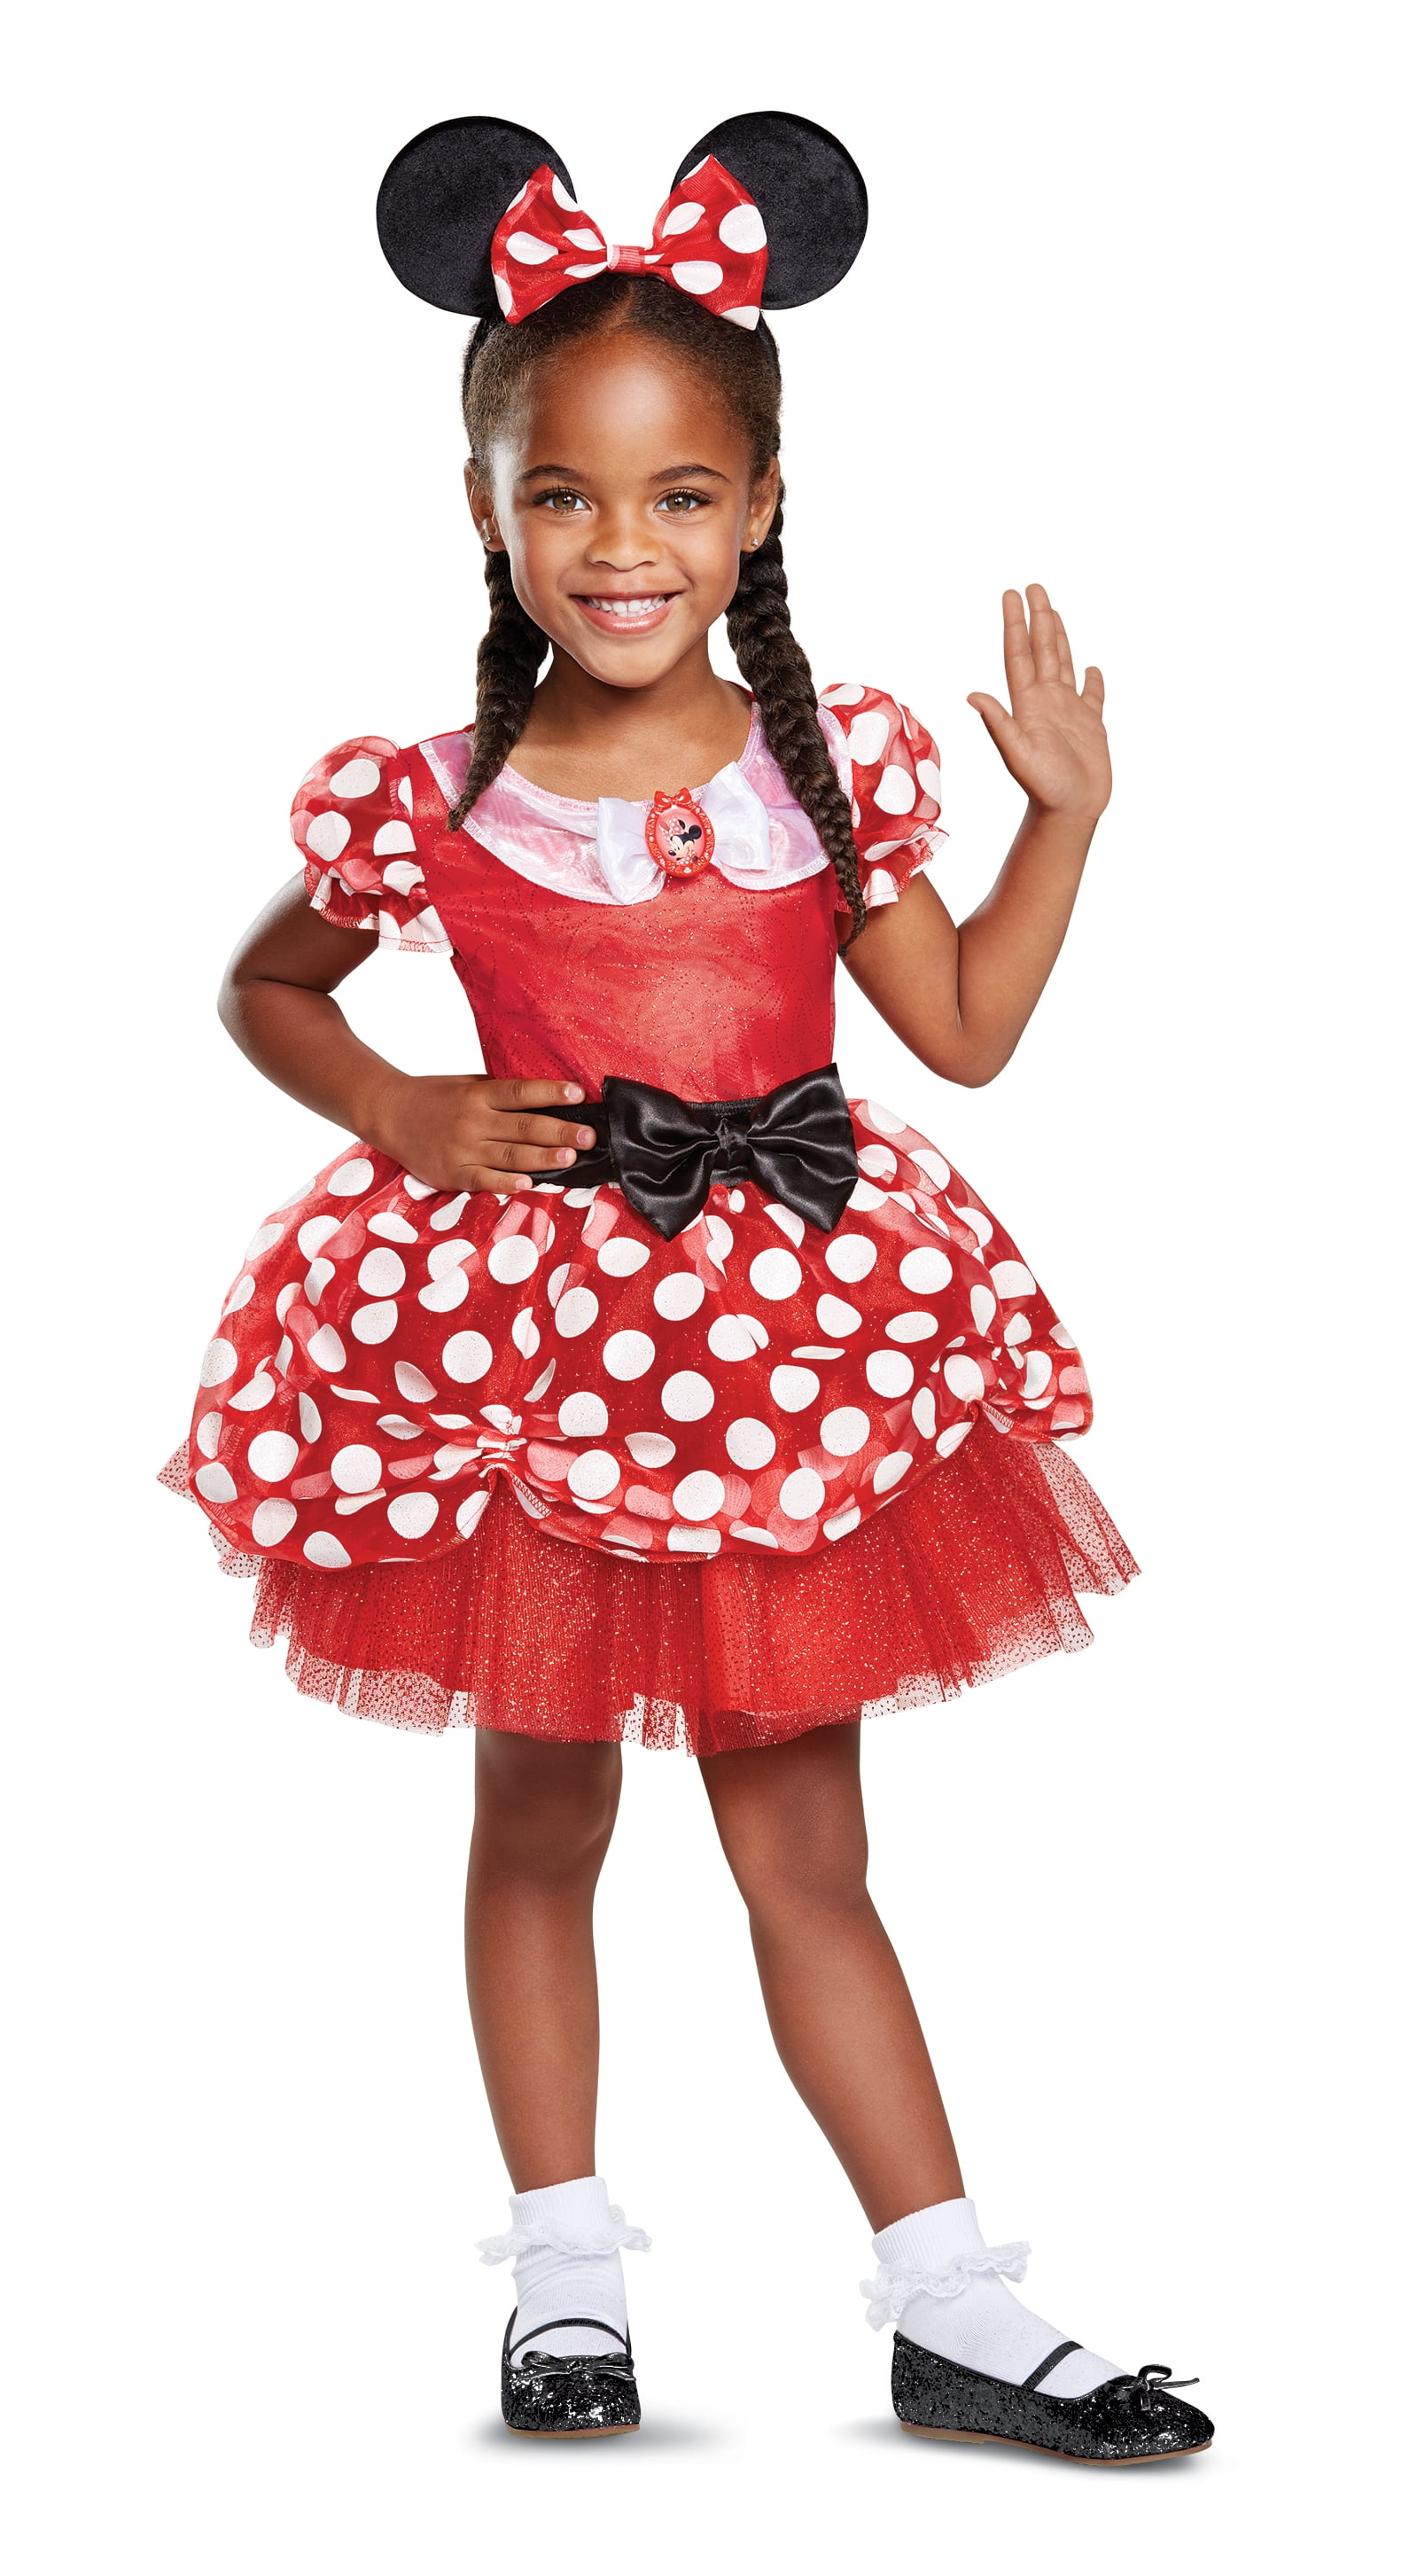 Ranking Top5 Minnie Mouse Halloween Or Dress Up Costume Toddler 2t